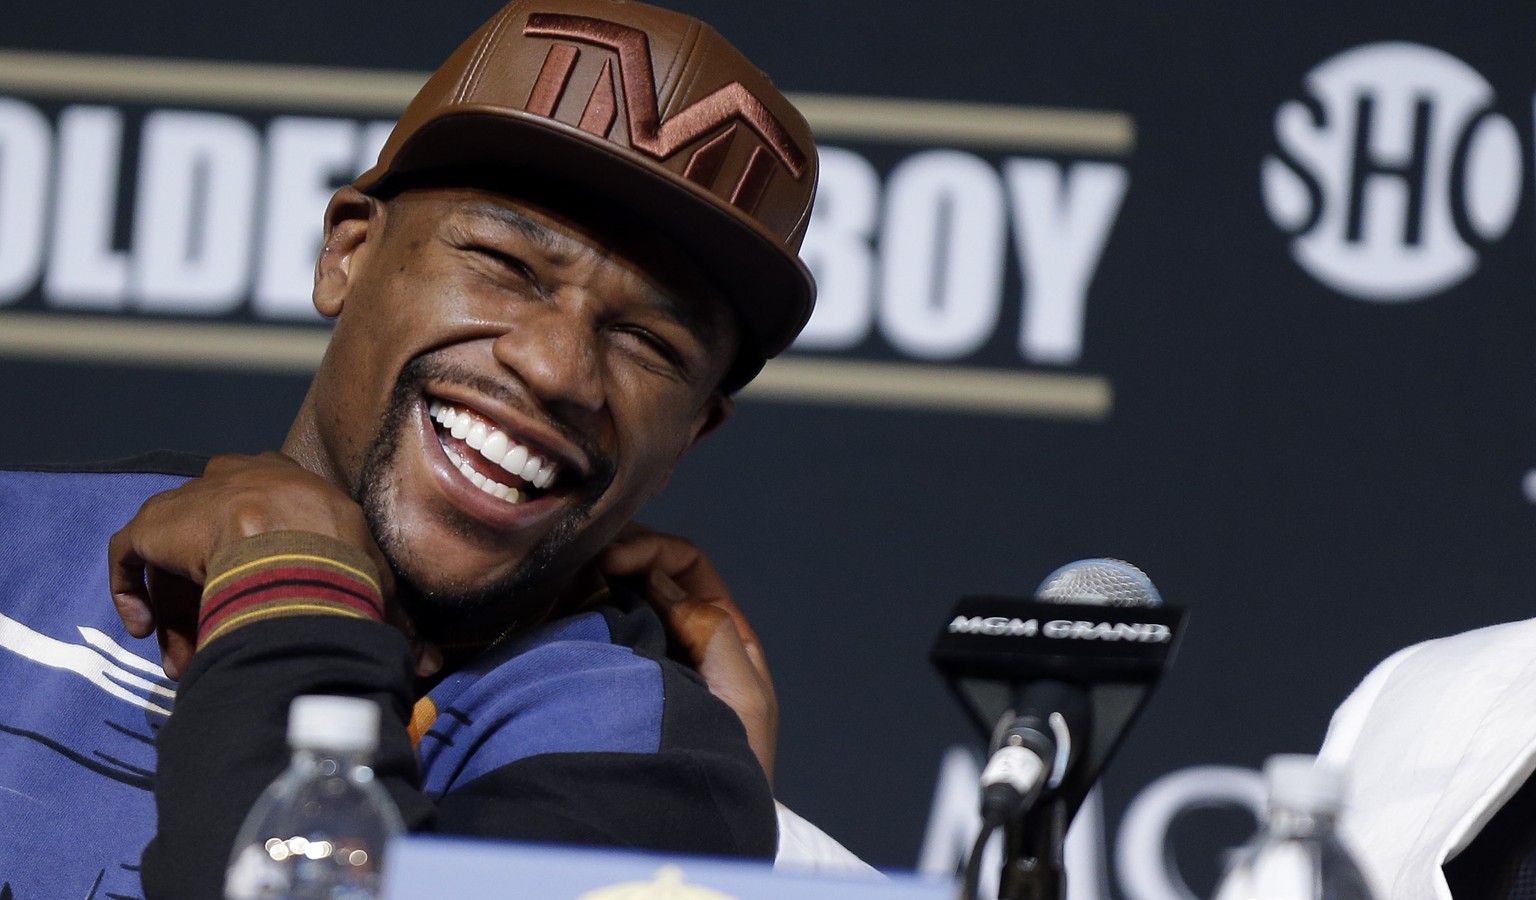 Boxer Floyd Mayweather Jr., left, and Mayweather Promotions CEO Leonard Ellerbe, laugh during a news conference Wednesday, April 30, 2014, in Las Vegas. Mayweather will face Marcos Maidana in a welter ...